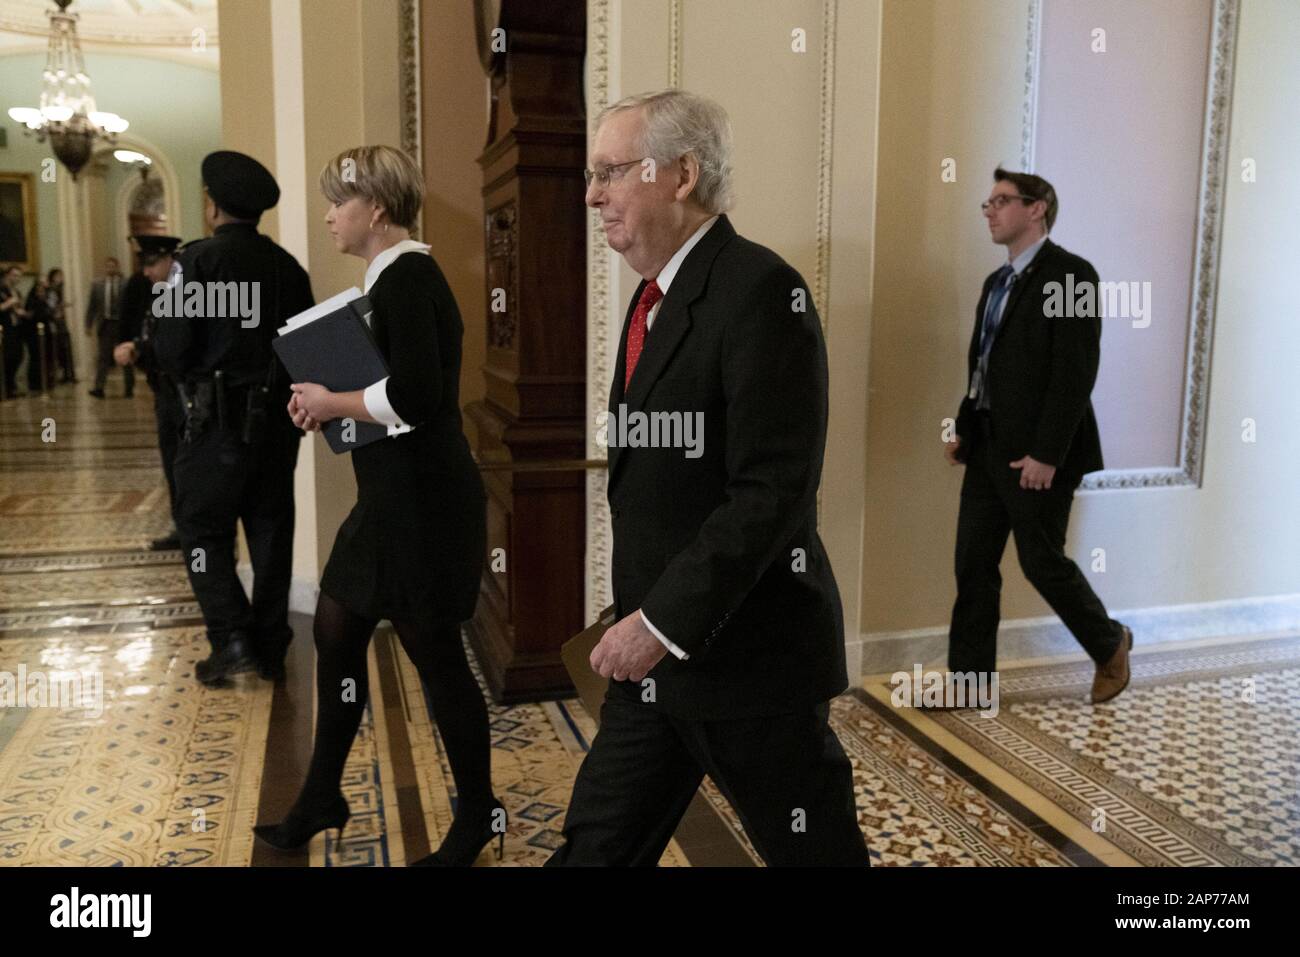 Washington, District of Columbia, USA. 21st Jan, 2020. Senate Majority Leader MITCH MCCONNELL (R-KY) walks out of the Mansfield Room, S207, and walks by the Ohio Clock before entering the Senate Chamber on Day 2 of the Impeachment of Donald John Trump, Jan. 21, 2020 Credit: Douglas Christian/ZUMA Wire/Alamy Live News Stock Photo